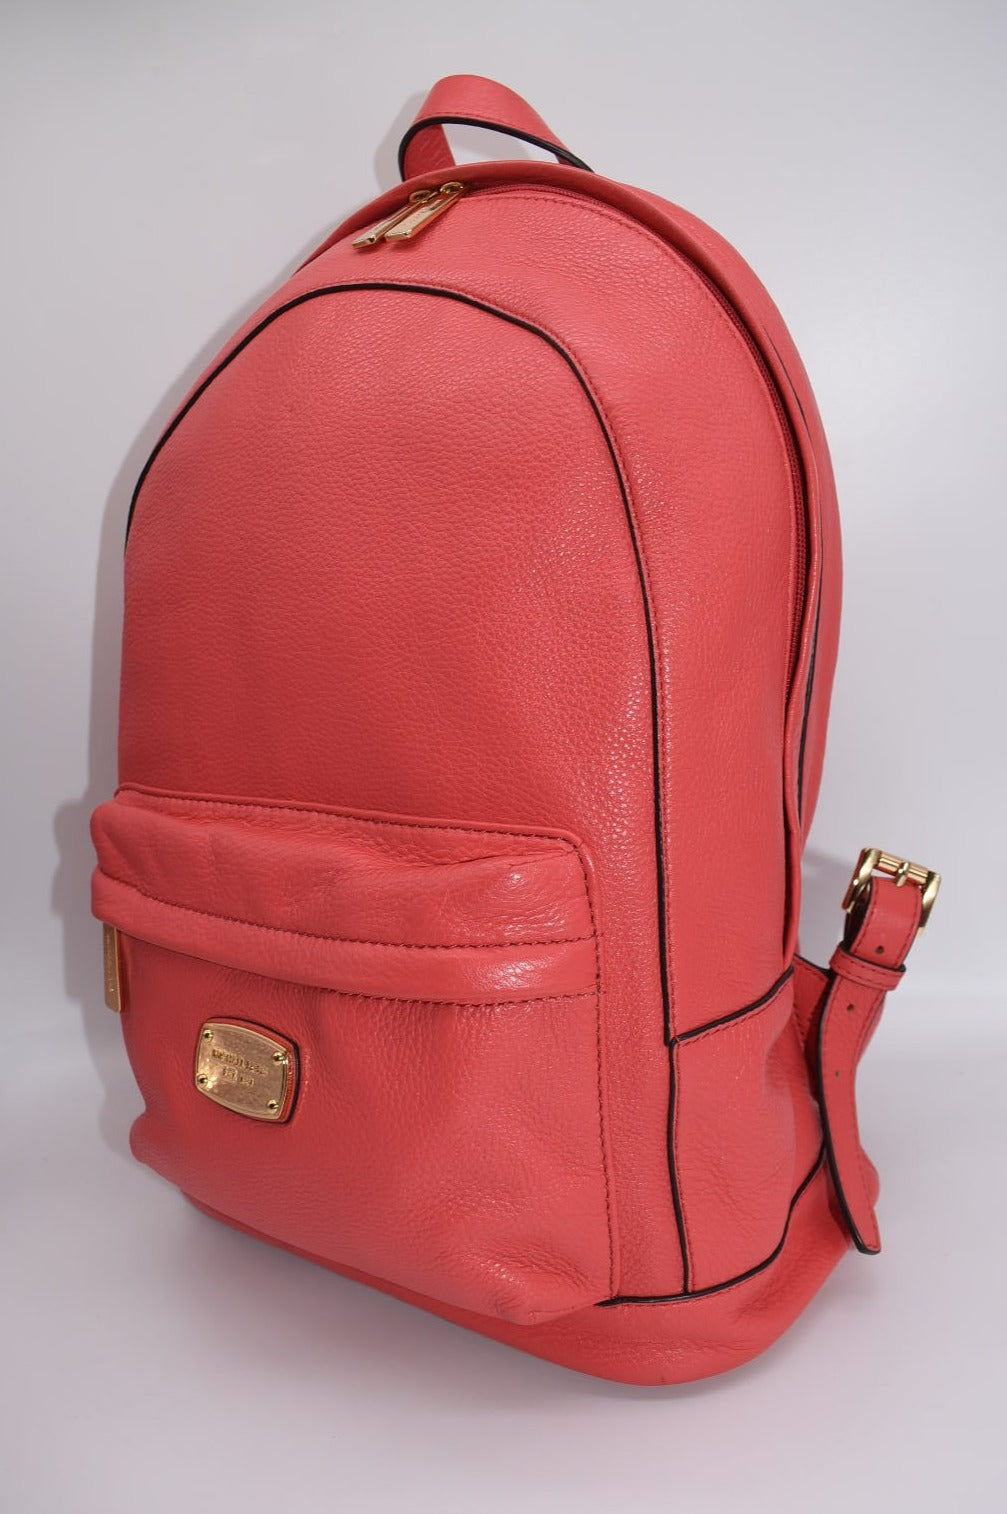 Michael Kors Large Pebbled Leather Backpack in Watermelon